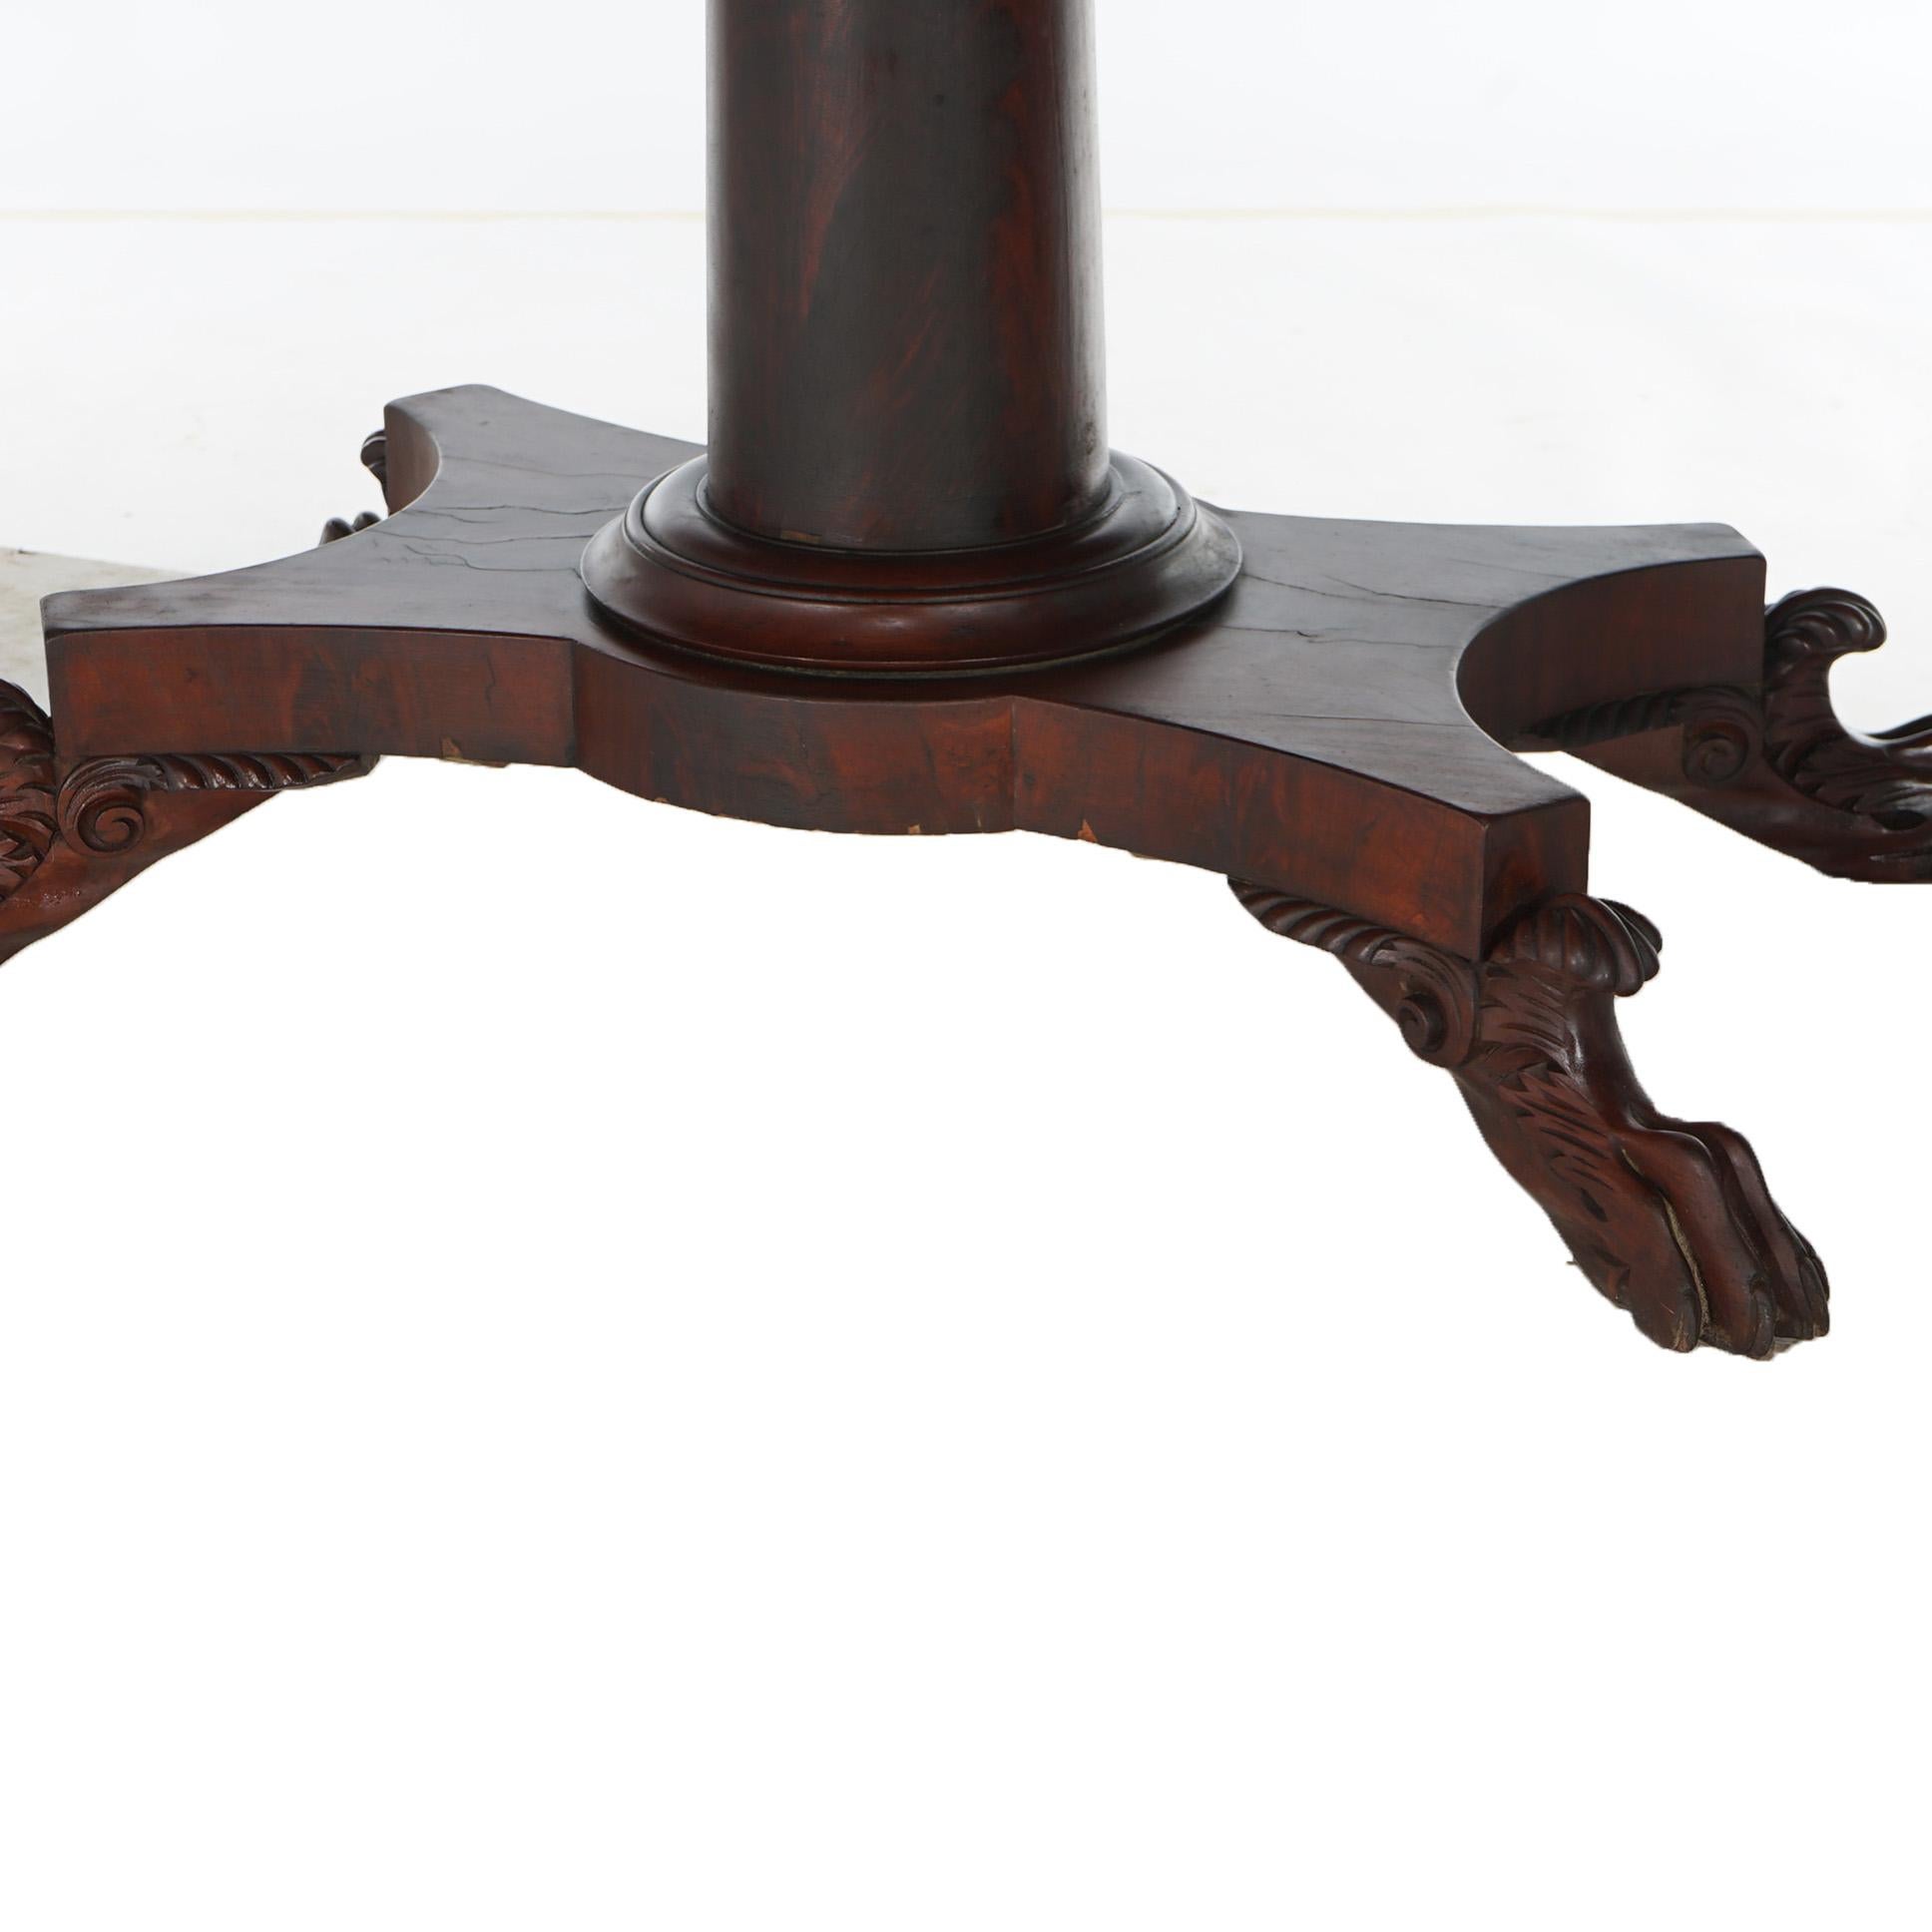 An antique American Empire Greco card table offers flame mahogany construction with flared column raised on four legs terminating in hairy paw feet, c1840

Measures - 29.5